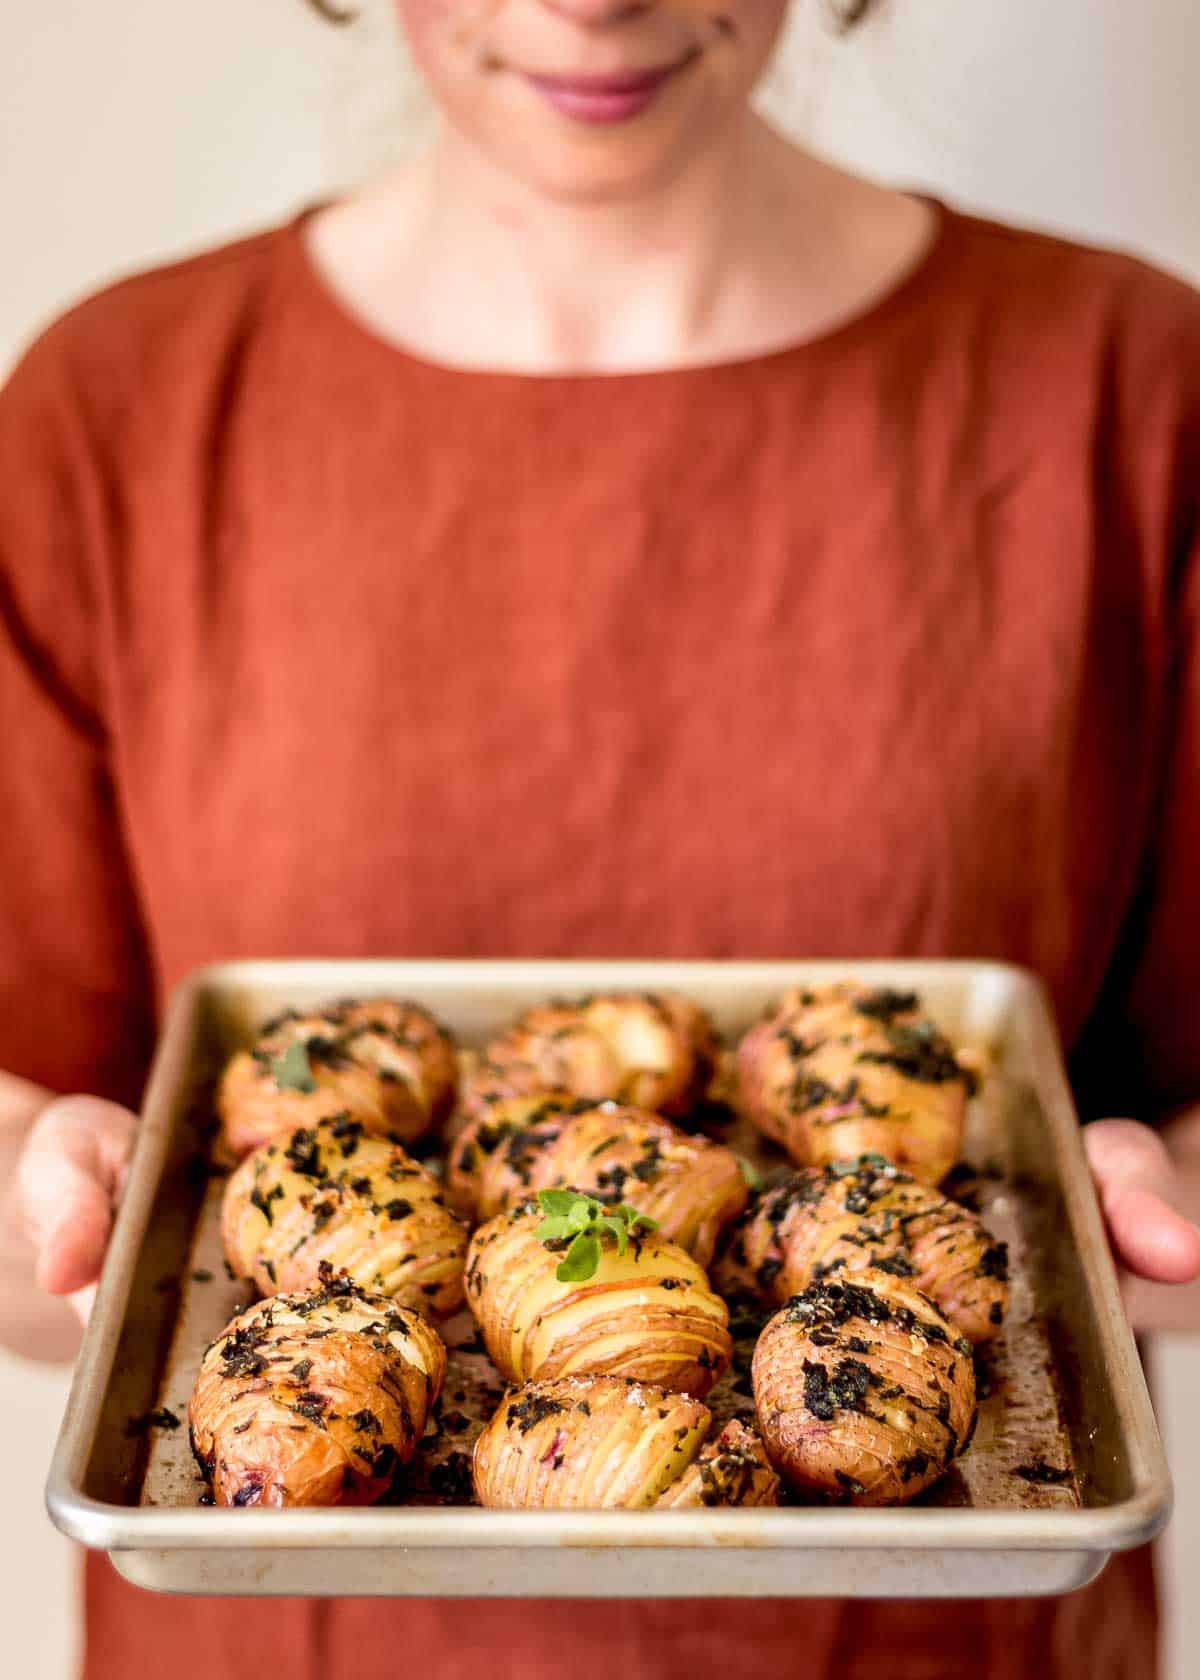 Elizabeth Emery from Vancouver with Love wears an orange shirt and holds a tray of hasselback new potatoes.